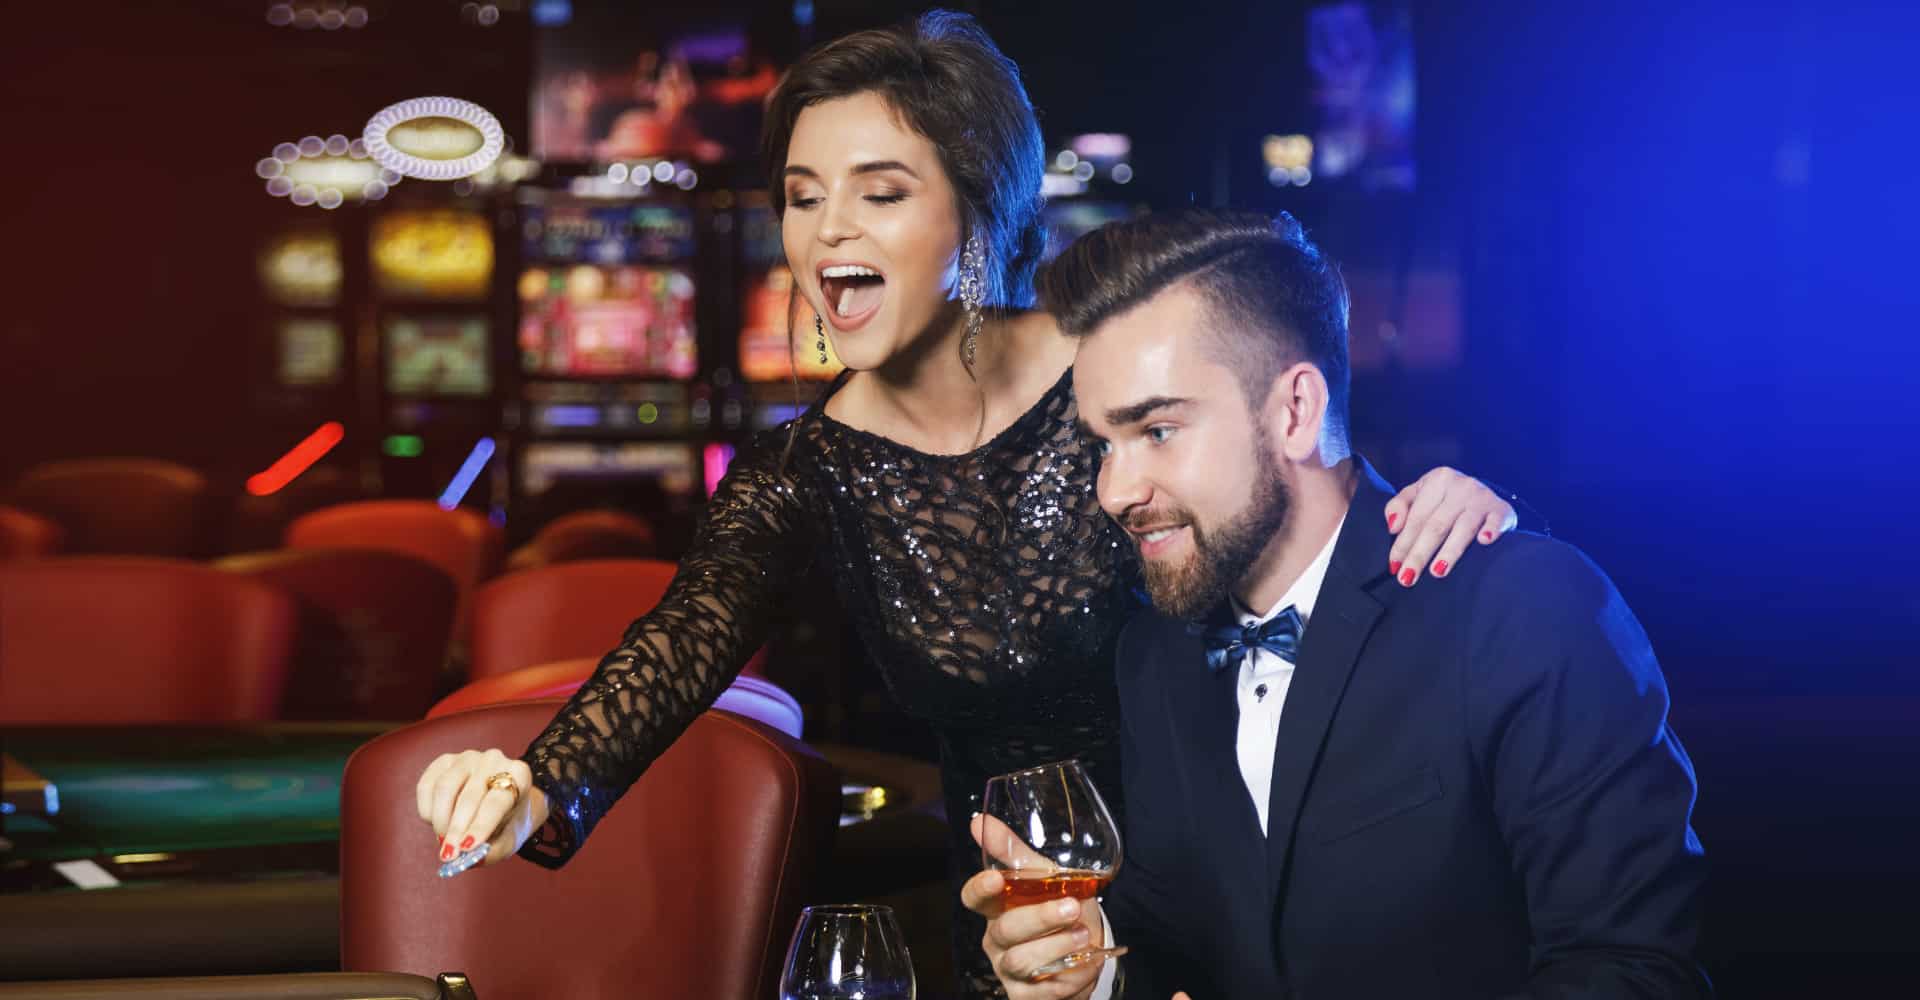 Couple dressed formally holding drinks at the casino table